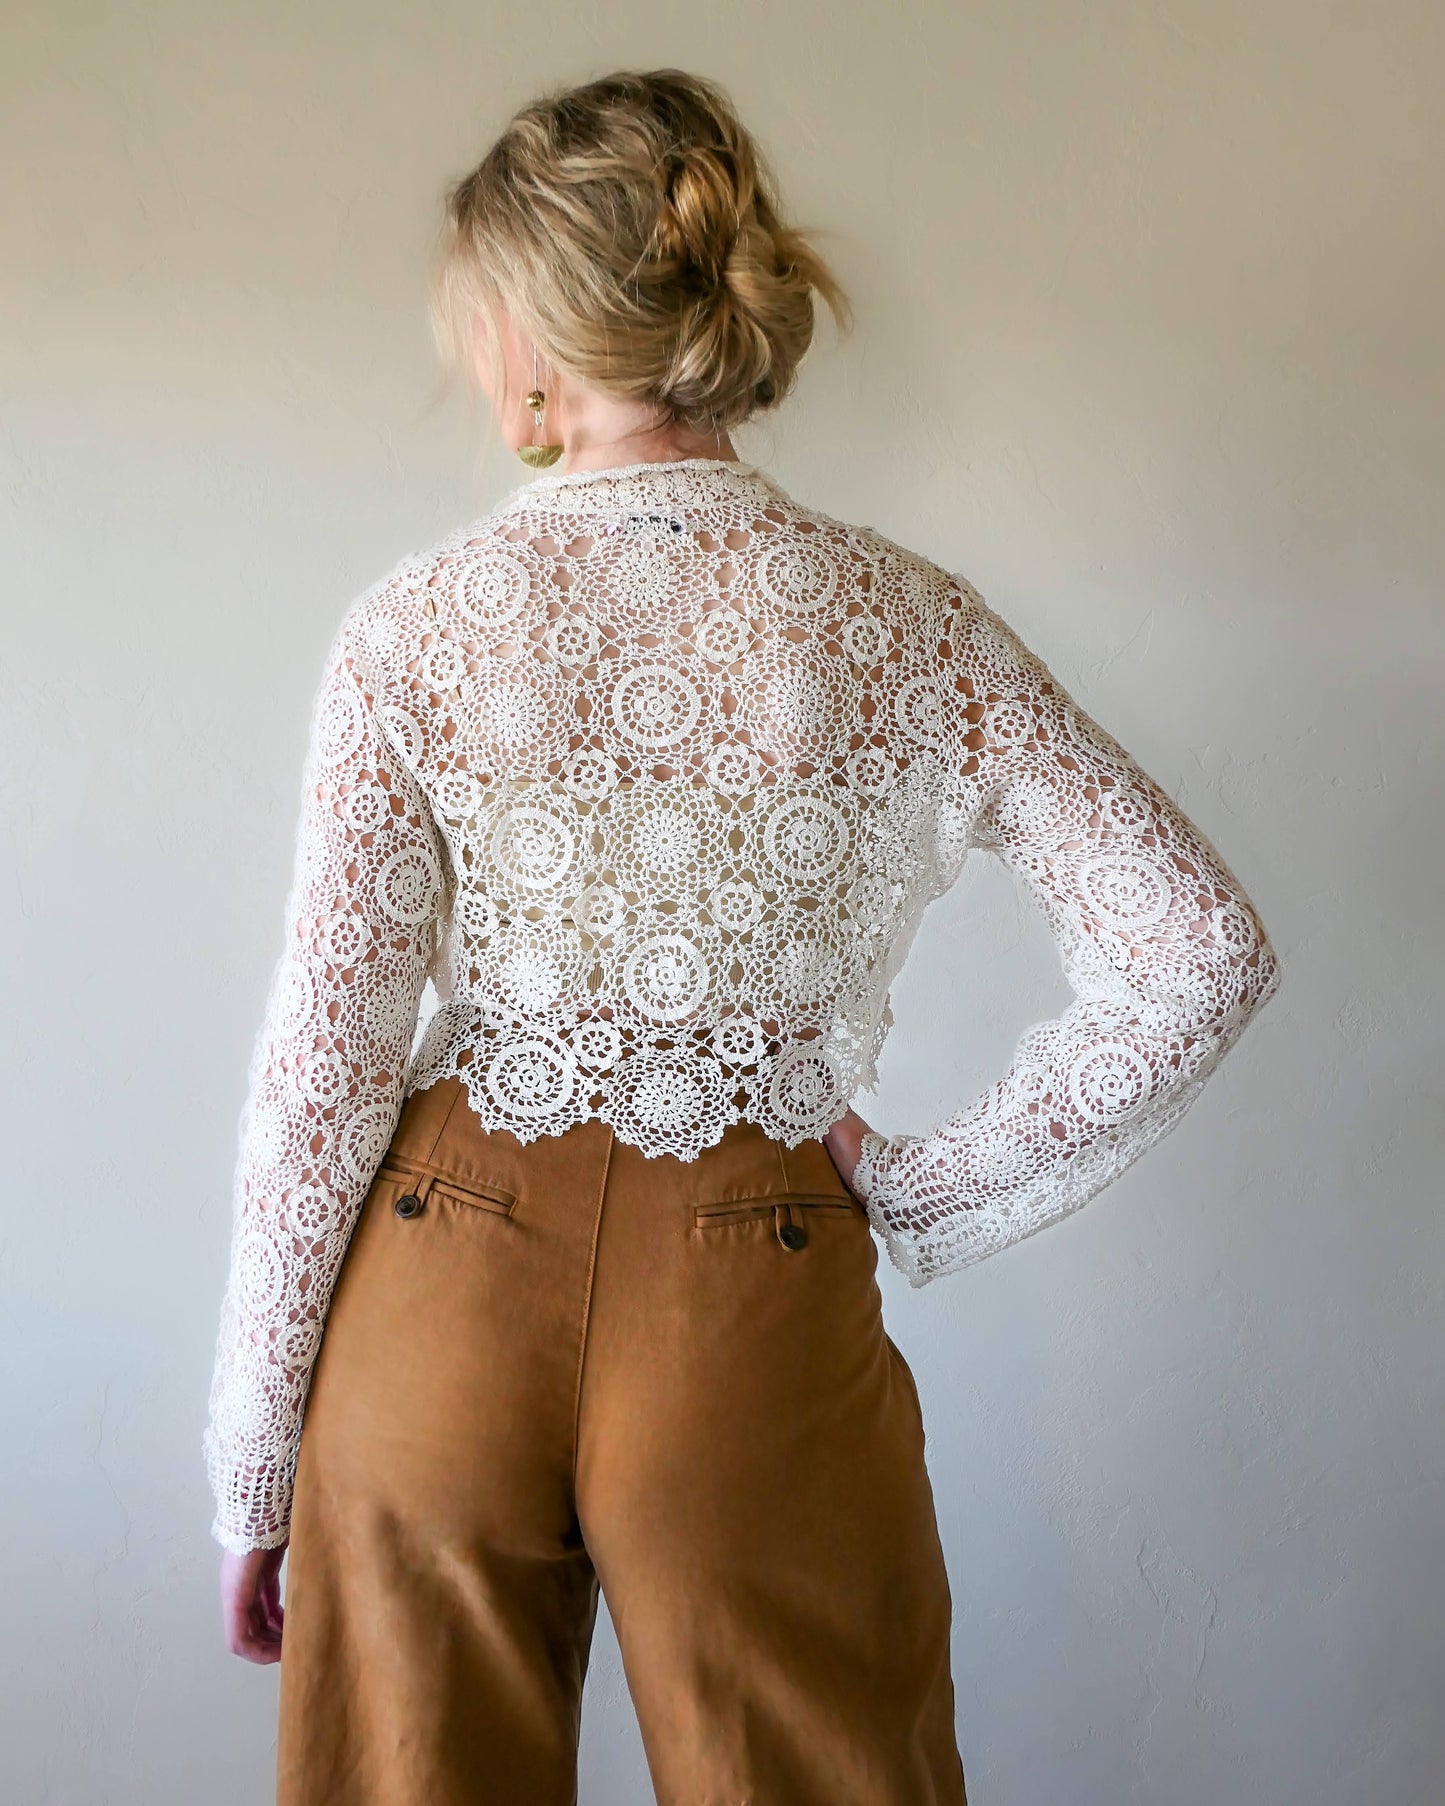 Back view of ivory colored crochet crop top. A versatile and boho chic hand crocheted cropped cardigan sweater with a unique, repeating kaleidoscope-like floral pattern throughout. Dress it down with a pair of jeans and sandals, or dress it up with neutral colored wide leg pants, heels, and a pair of vintage dangly earrings.